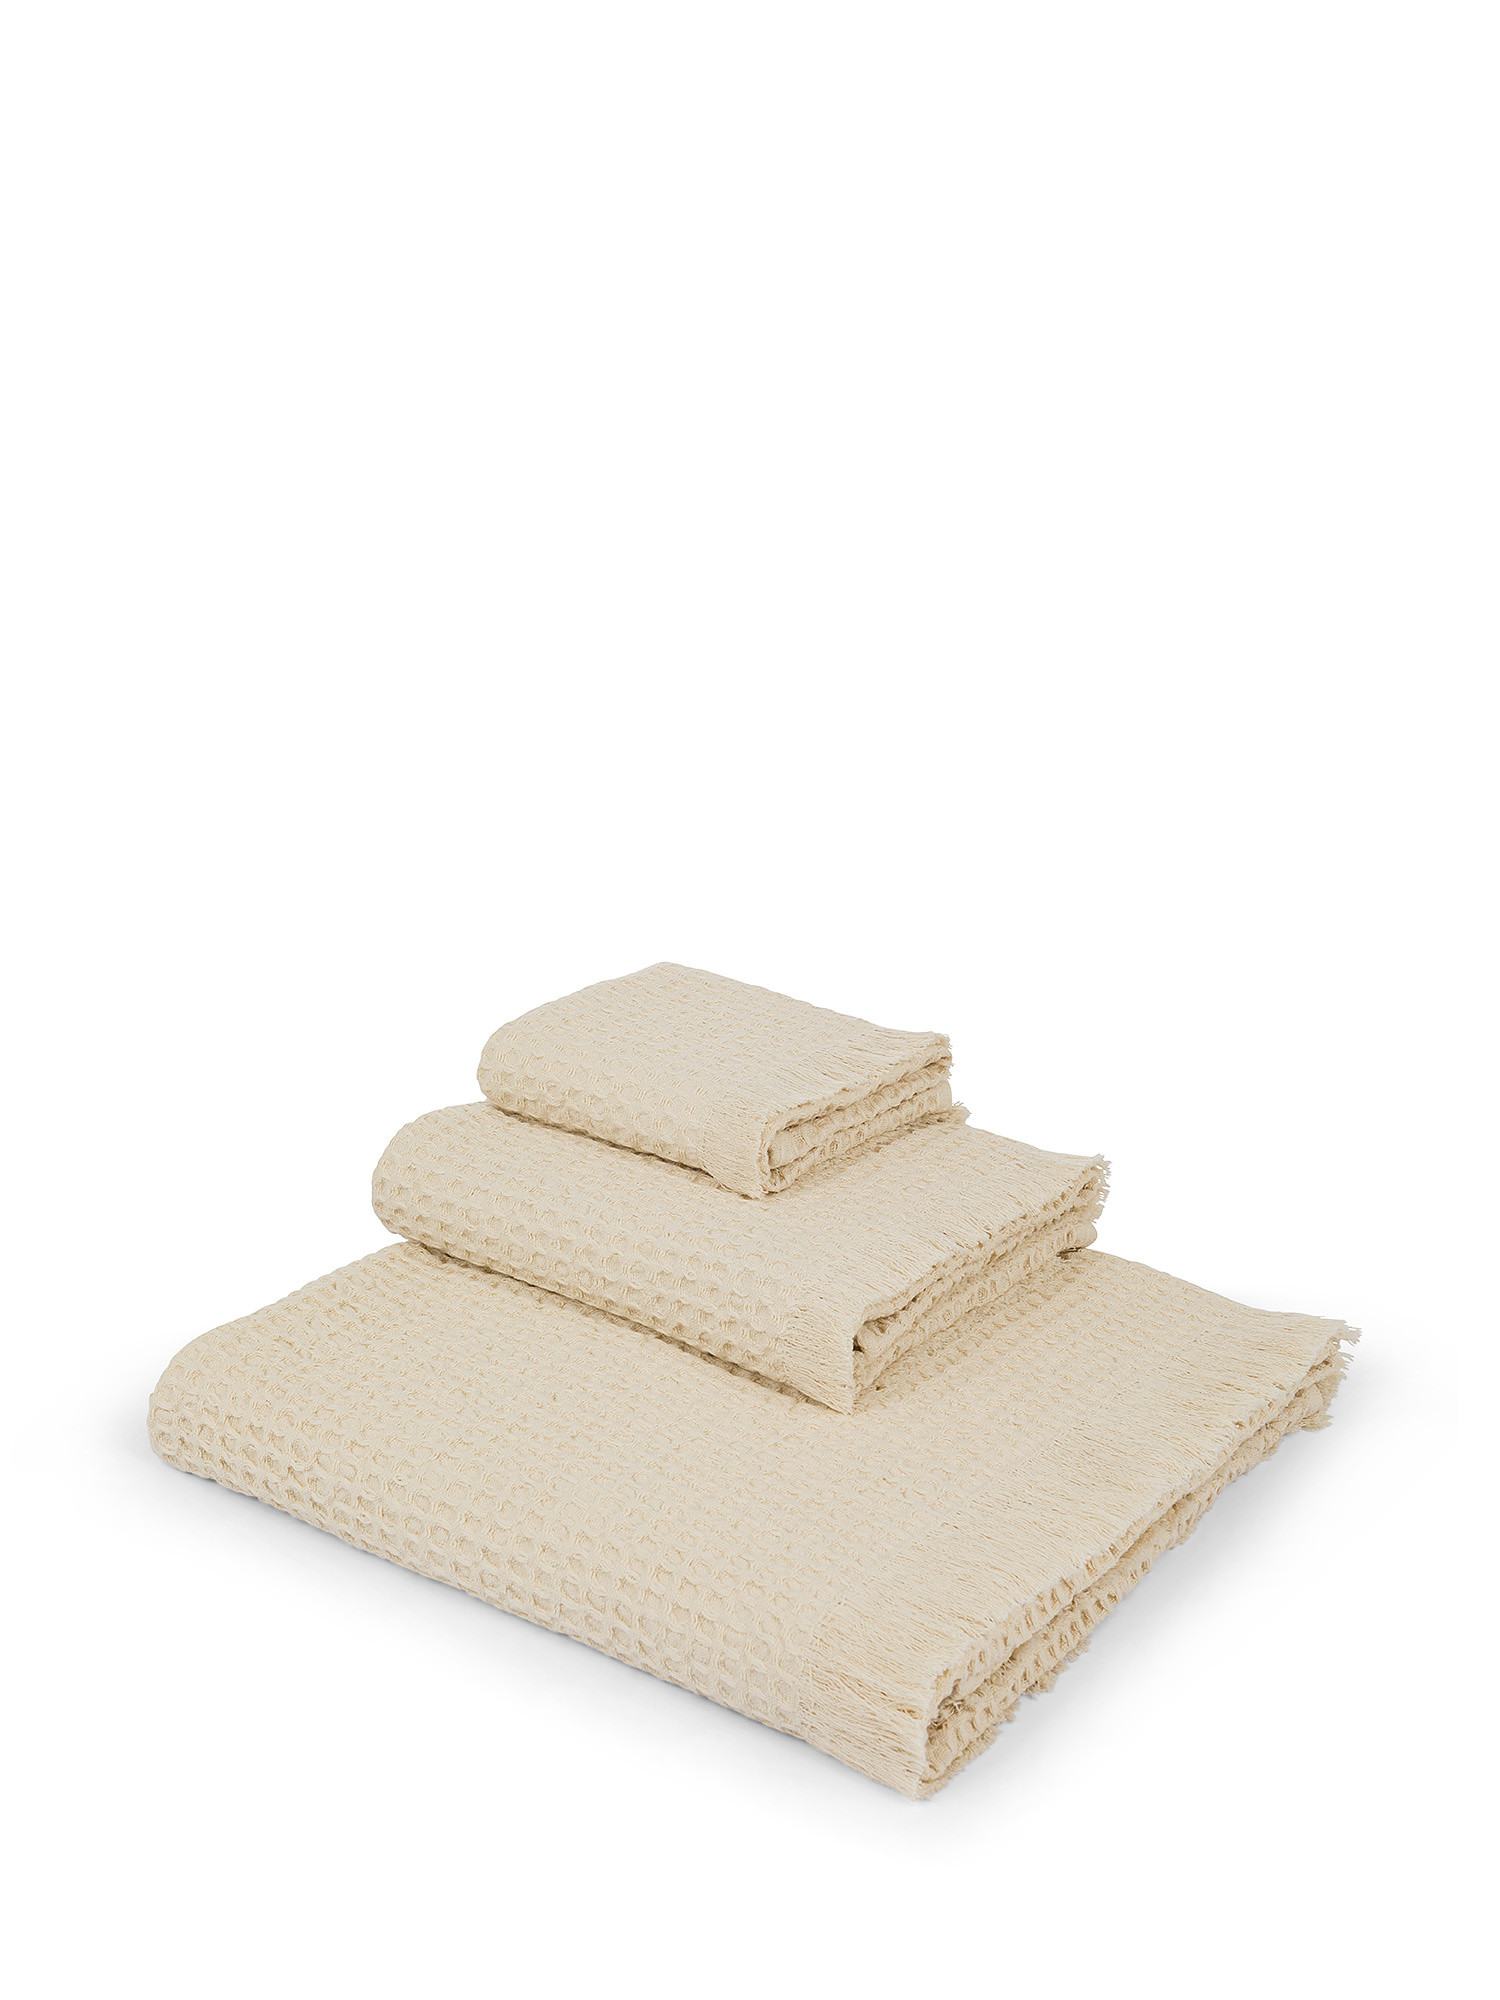 Thermae honeycomb cotton towel, Beige, large image number 0